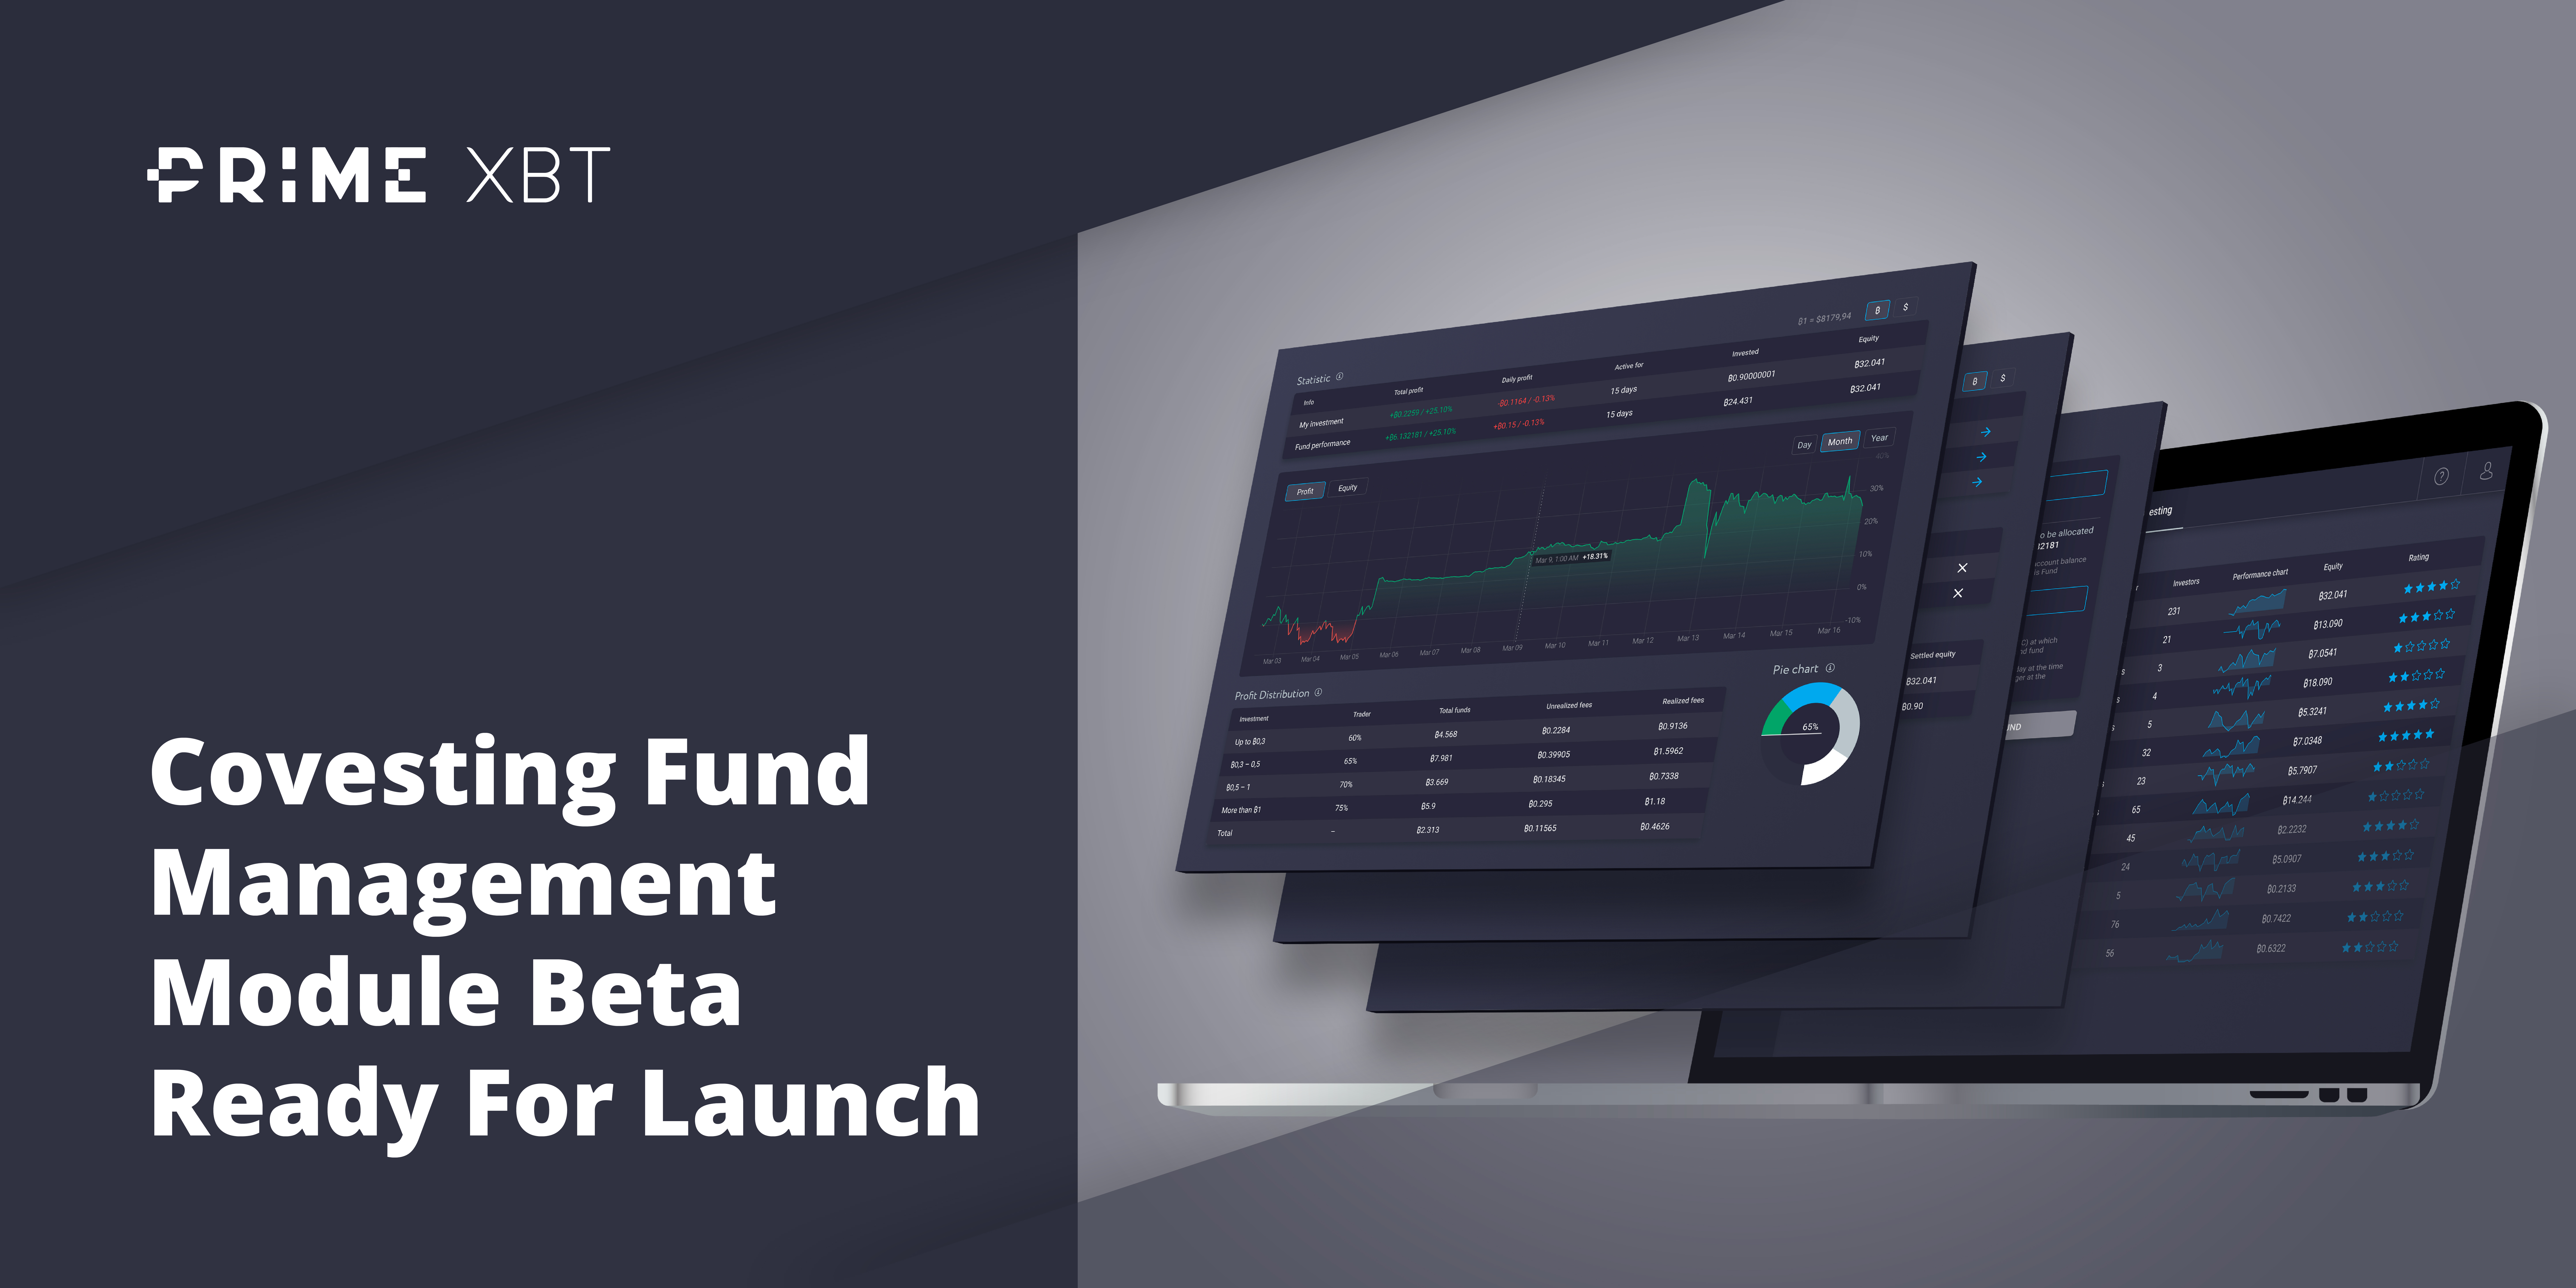 Covesting Fund Management Module Beta Ready For Launch, Here’s How It Works - 2020 03 20 20.01.45